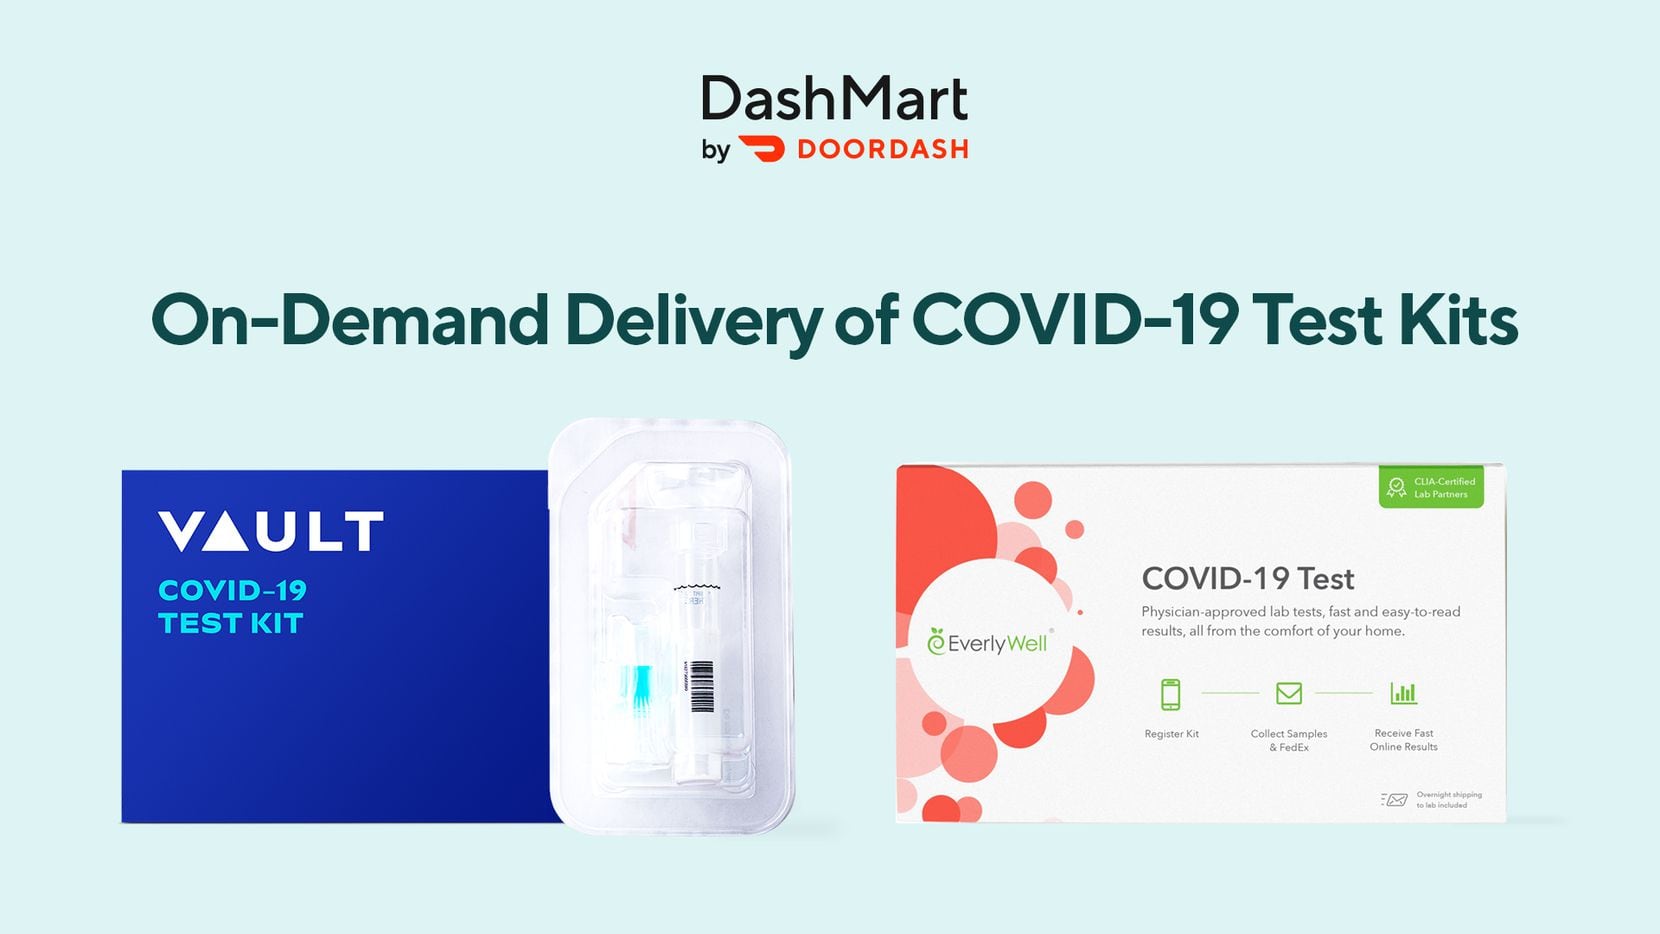 DoorDash is partnering with Vault Health and Everlywell to deliver at-home COVID-19 testing kits in under an hour.